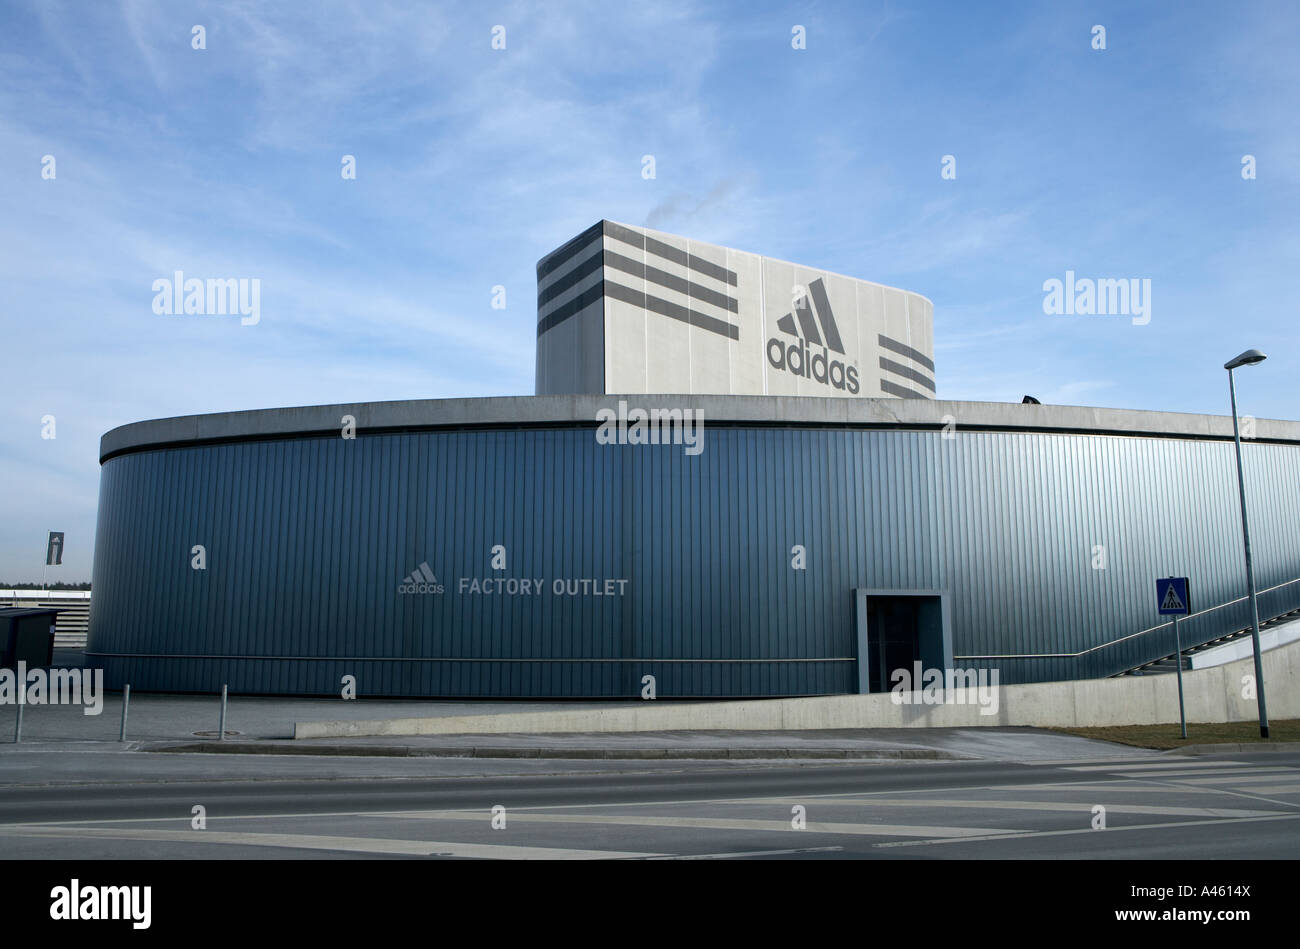 Adidas Factory Outlet Center Stock Photo - Alamy